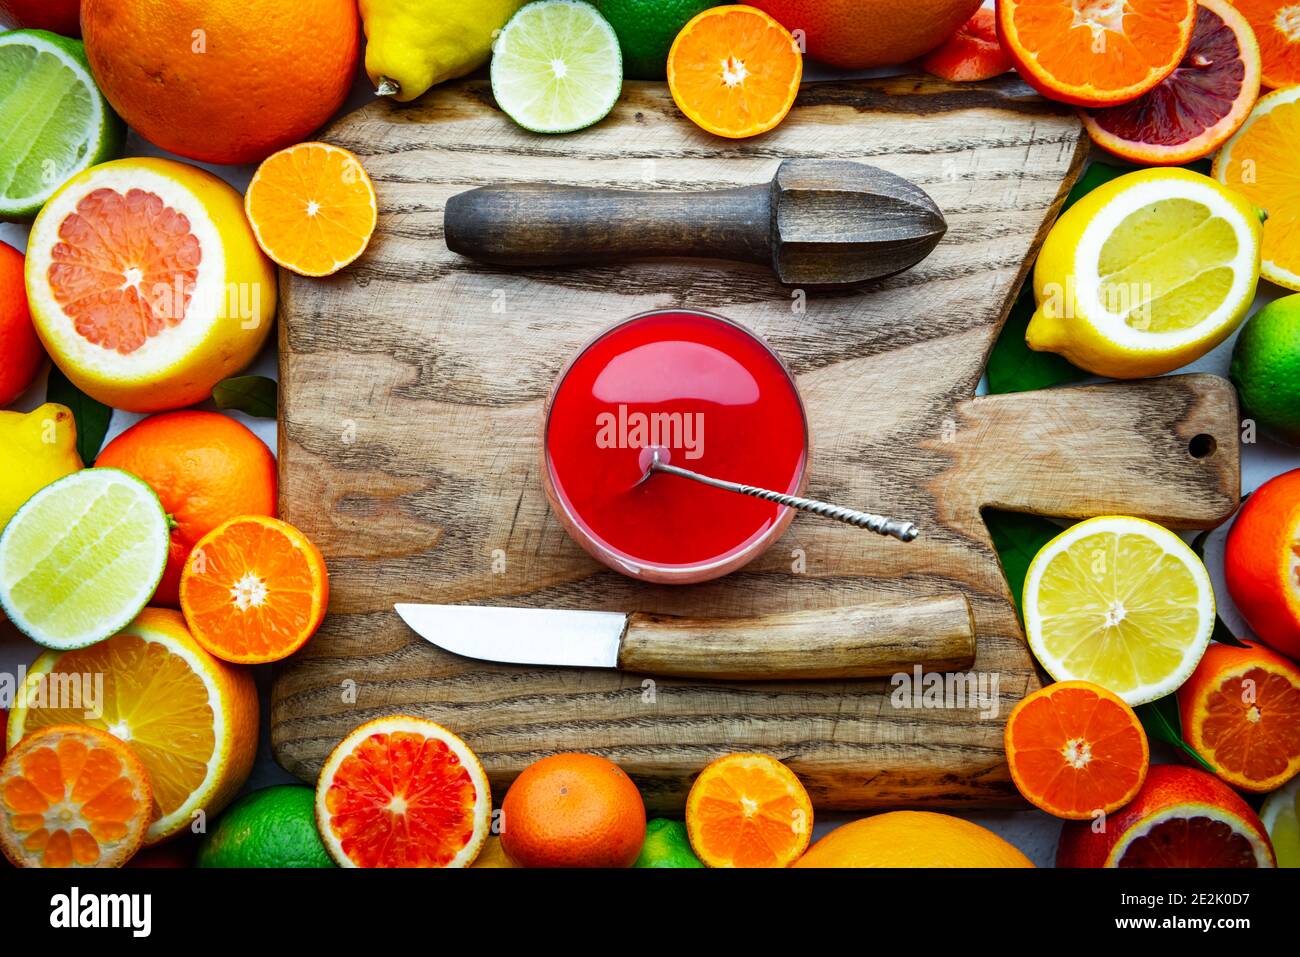 Mix of different citrus fruits and glass of juice with wooden board, squeezer and knife closeup. Healthy diet vitamin concept. Food photography Stock Photo